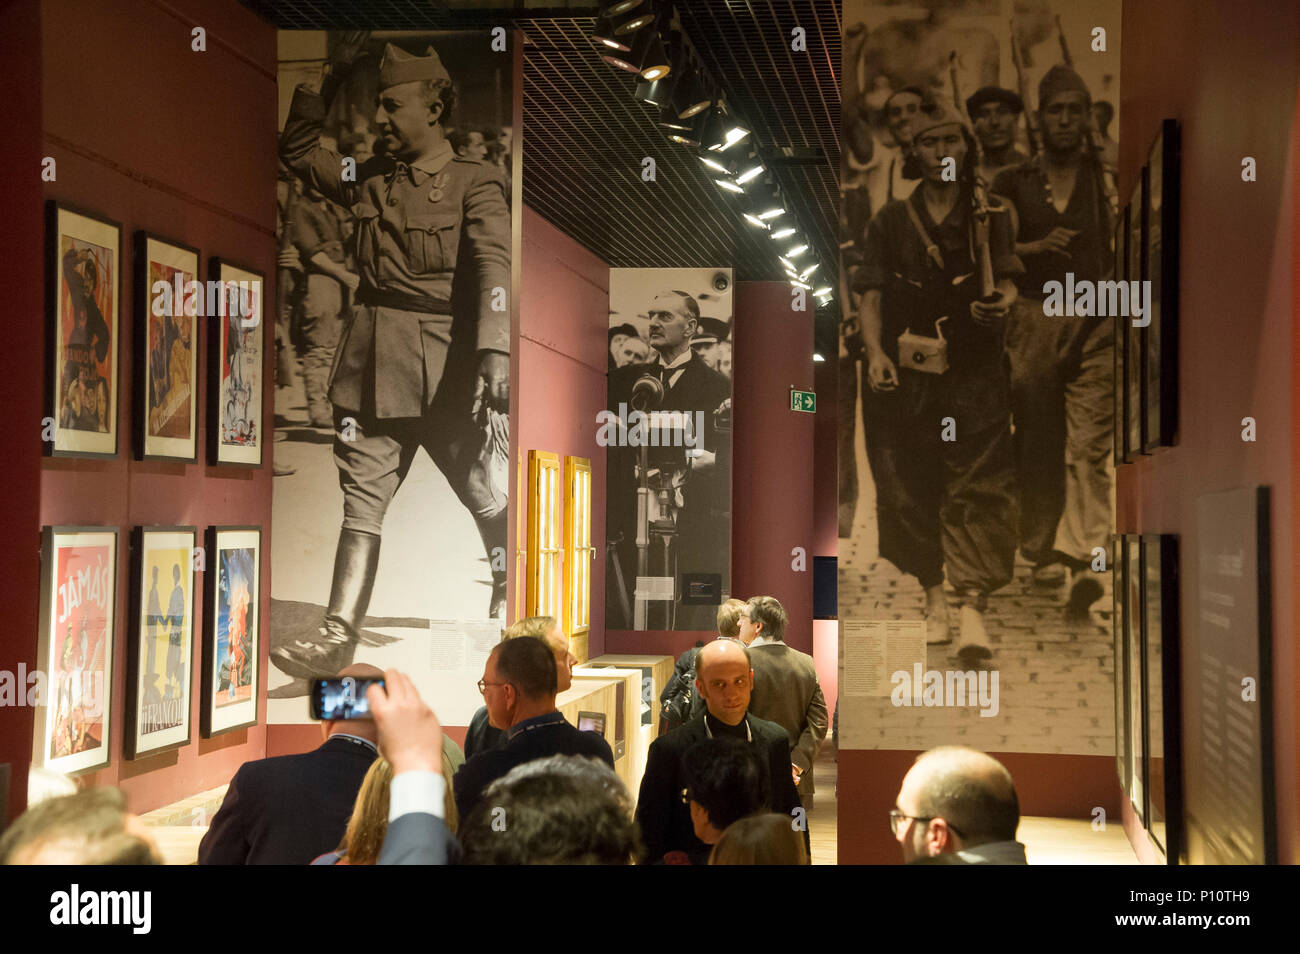 Spanish dictator Francisco Franco and Neville Chamberlain as a part of exhibion in Museum of the Second World War in Gdansk, Poland. January 23rd 2017 Stock Photo